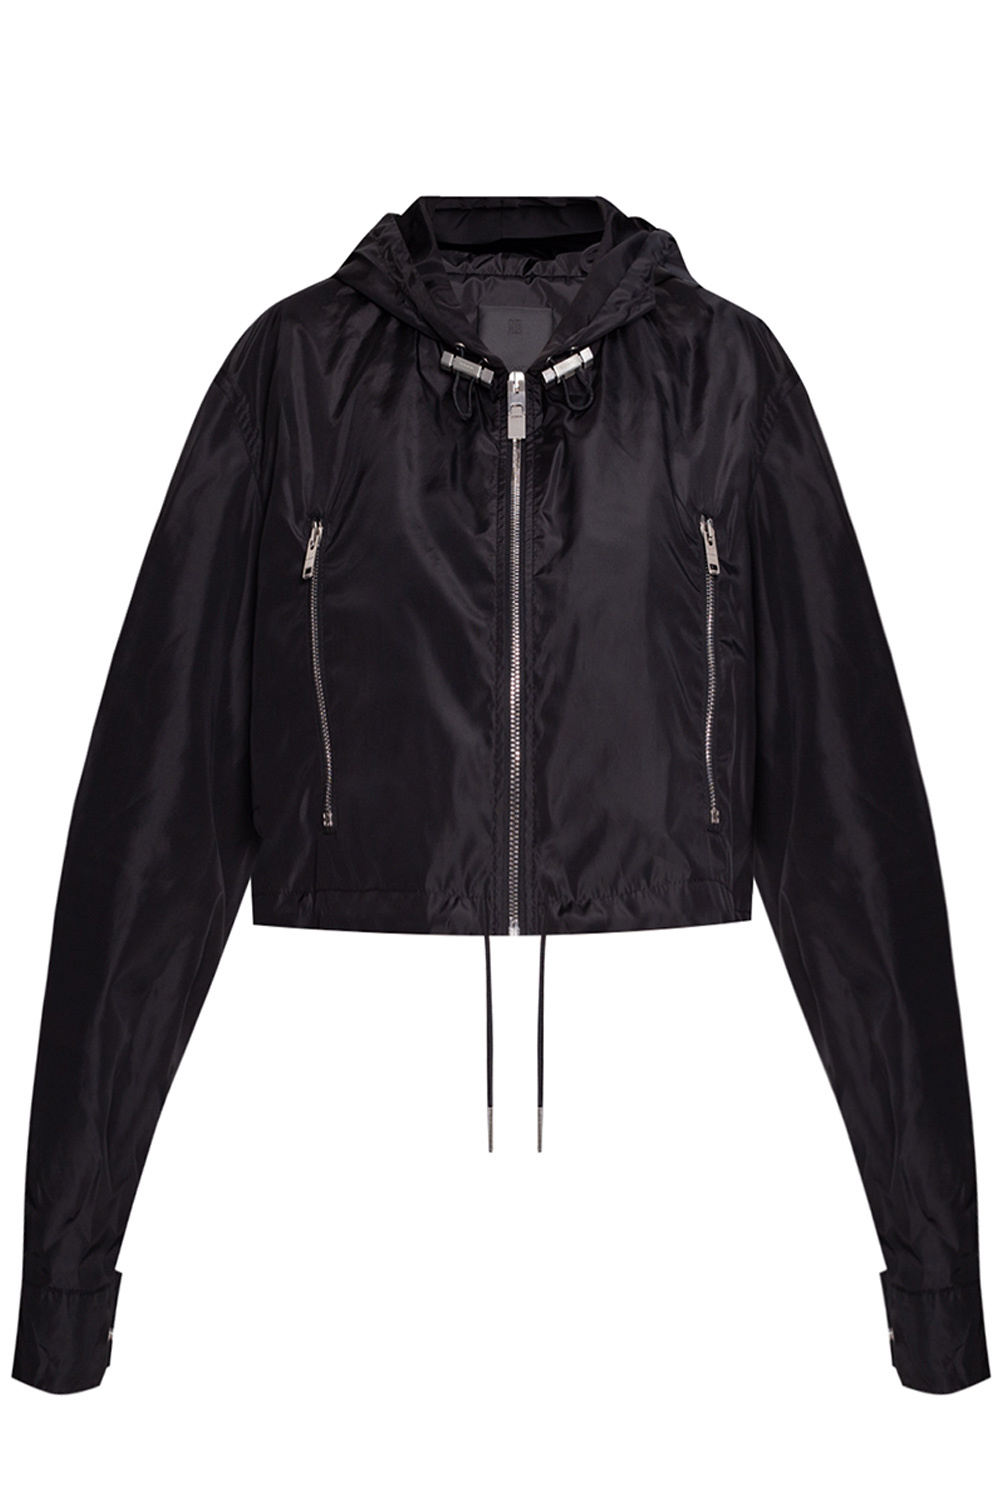 Givenchy Hooded jacket | Women's Clothing | IetpShops